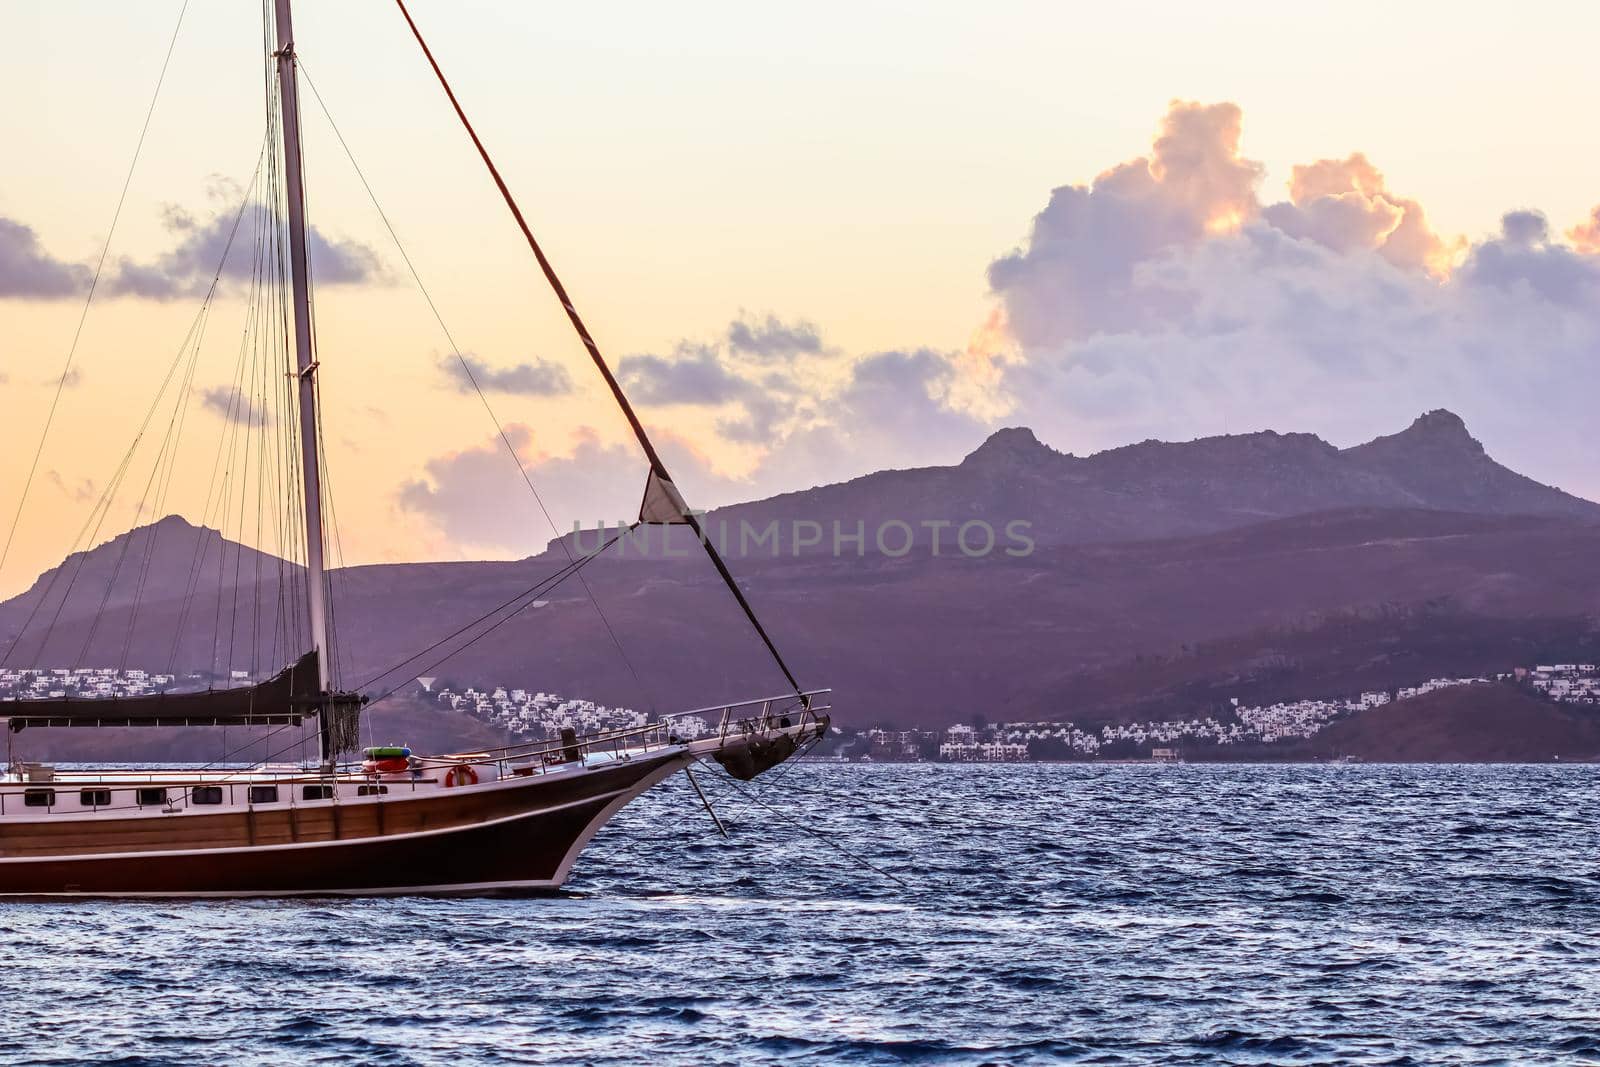 Beautiful sunset on the Aegean Sea with mountains and a sailboat. Seascape, travel and nature concept. High quality photo